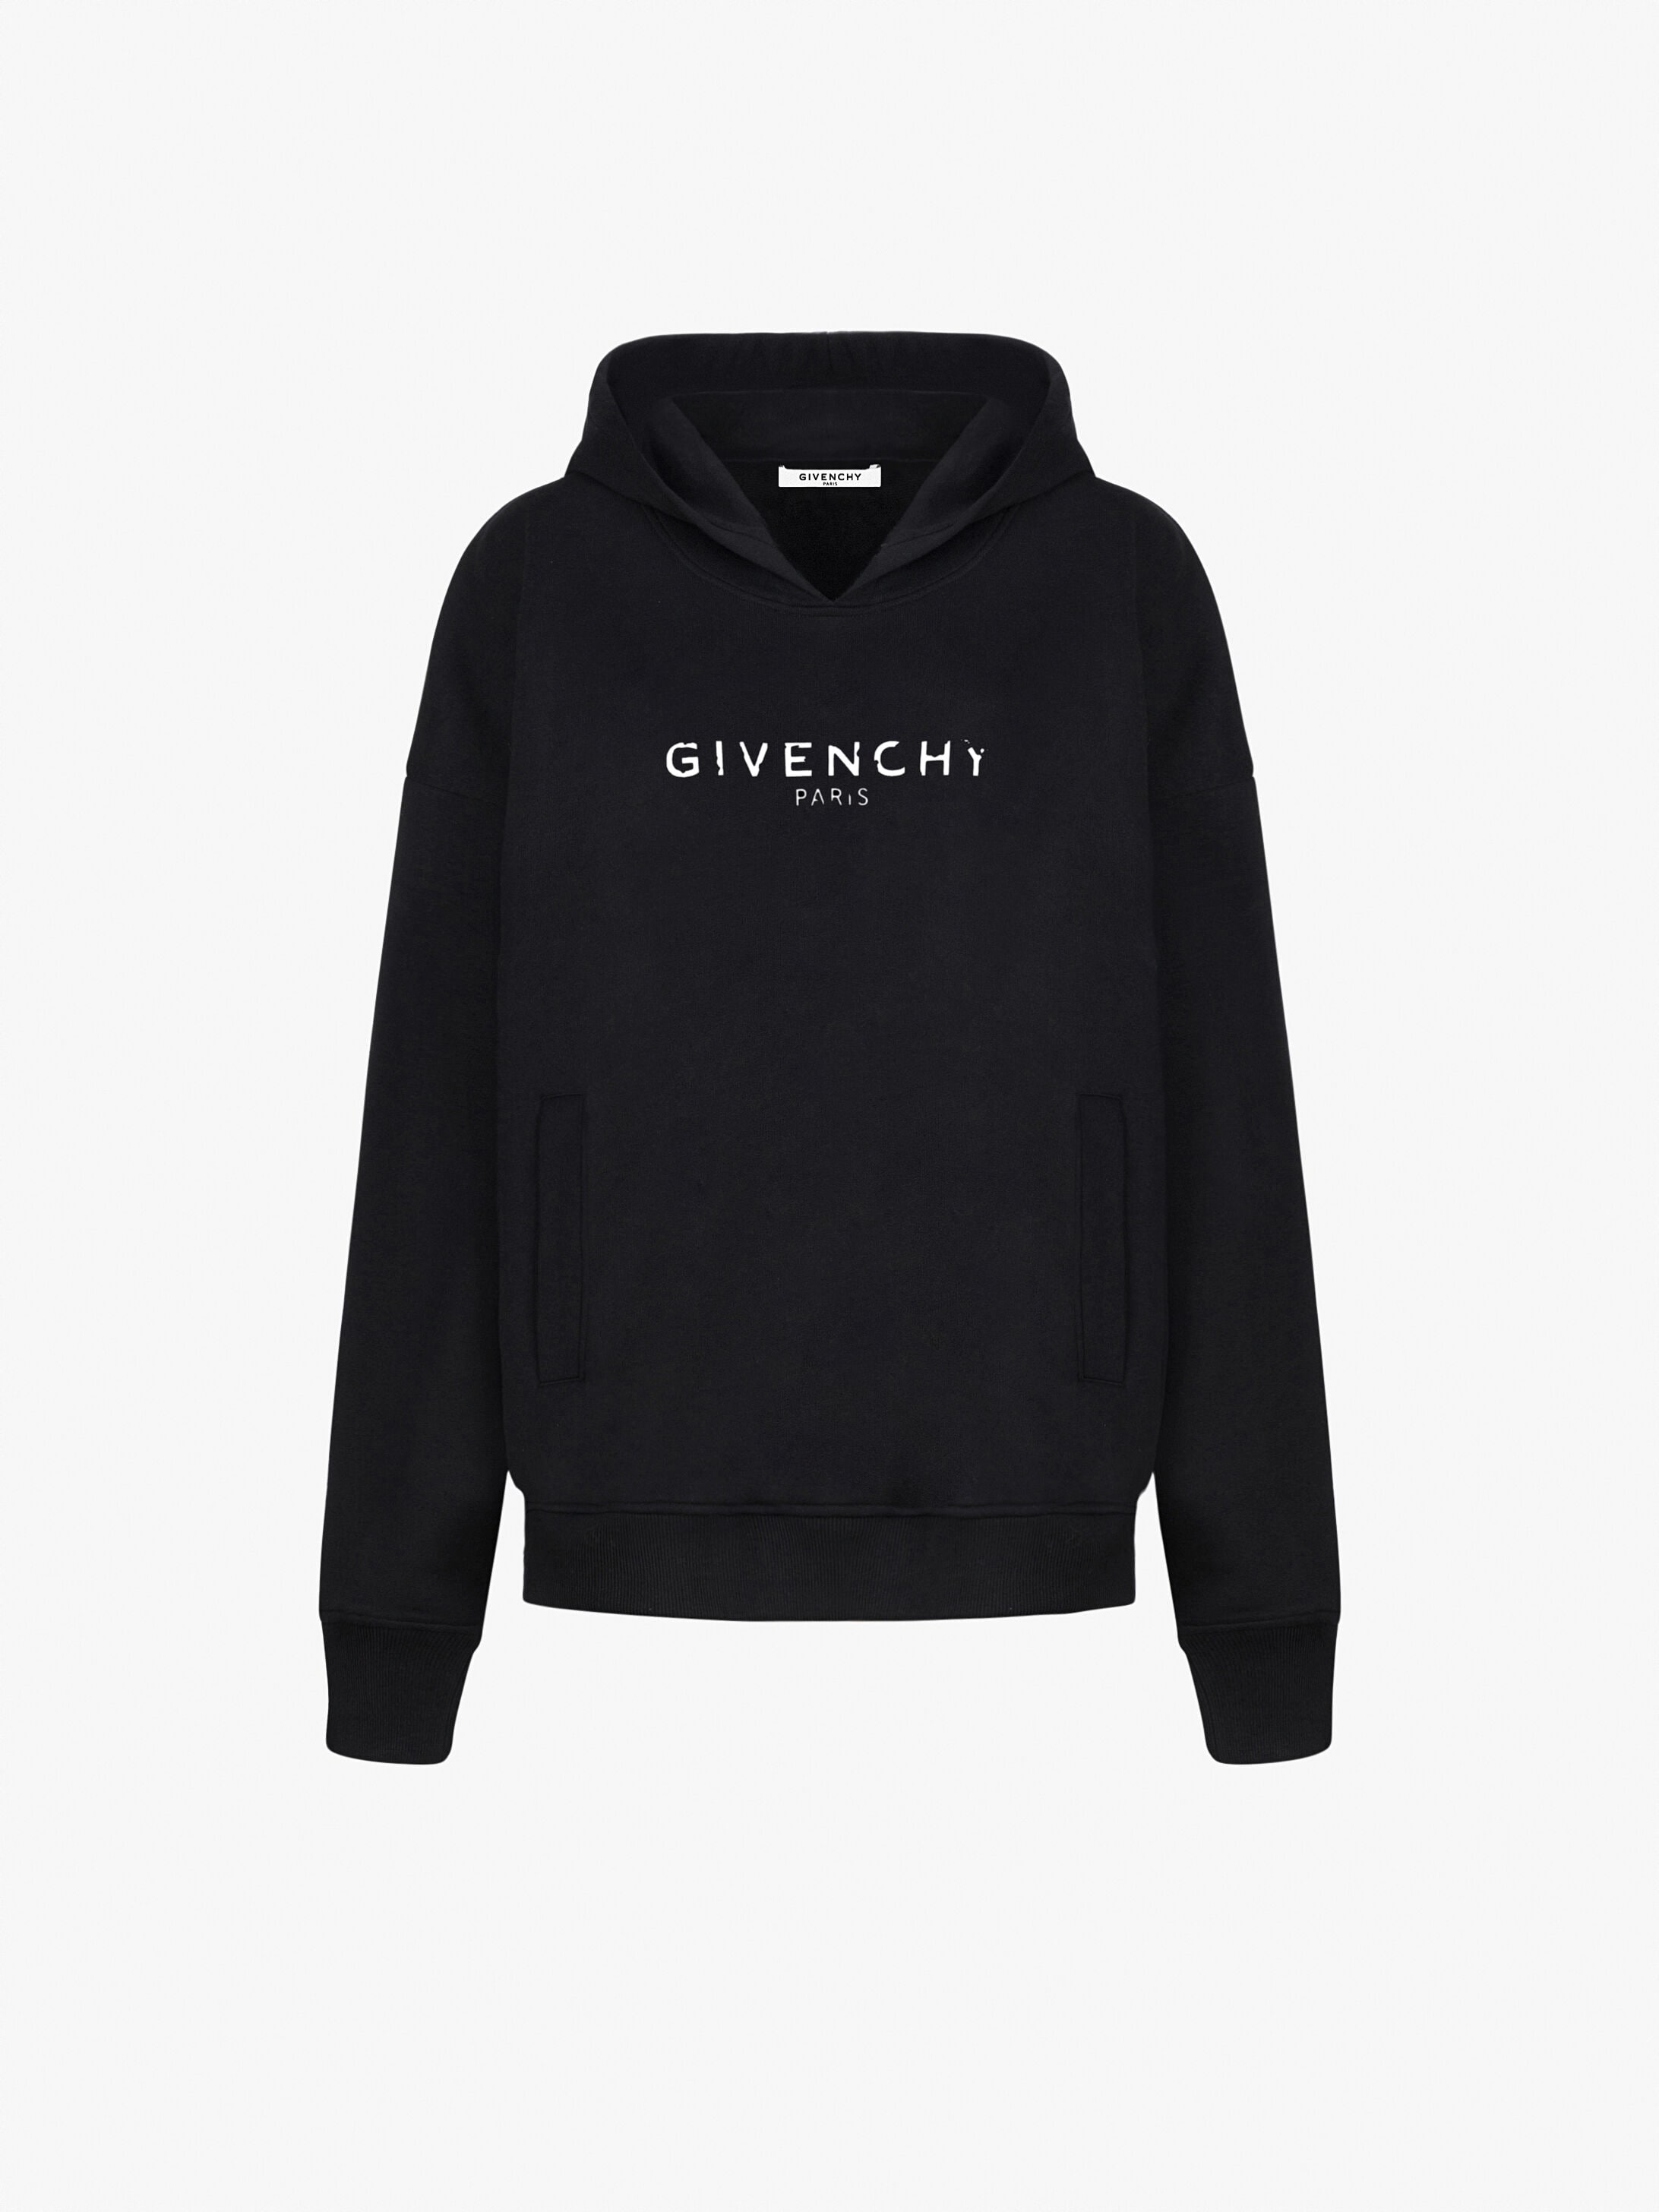 GIVENCHY PARIS oversized vintage hoodie 